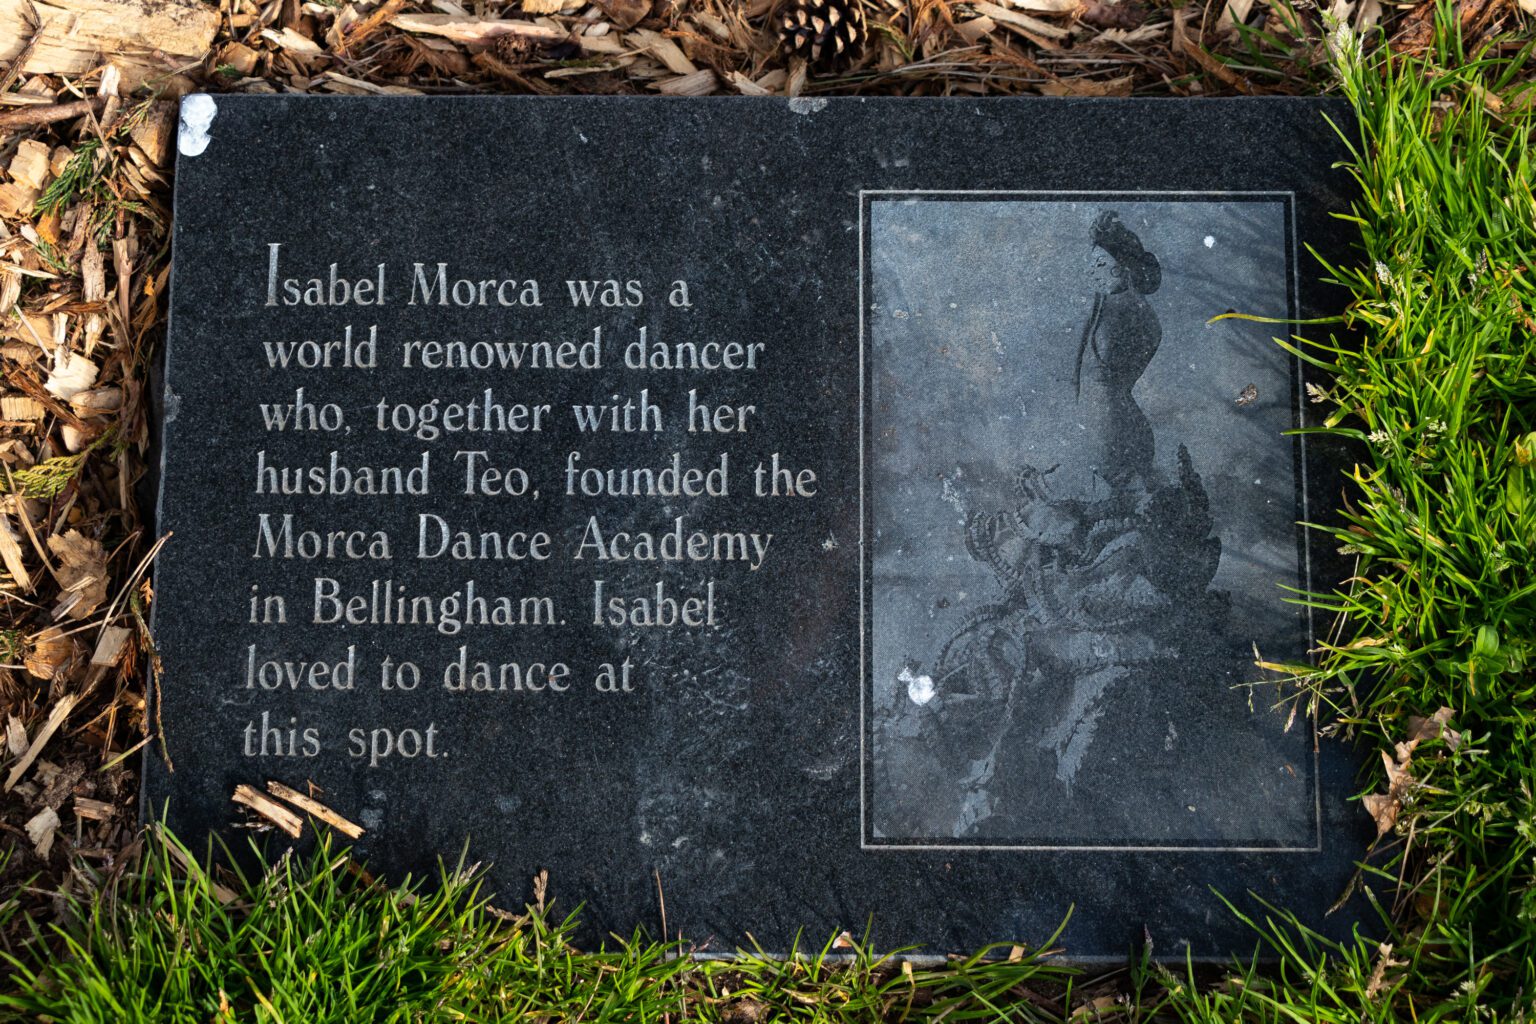 Isabel Morca's memorial stone is located at Boulevard Park.